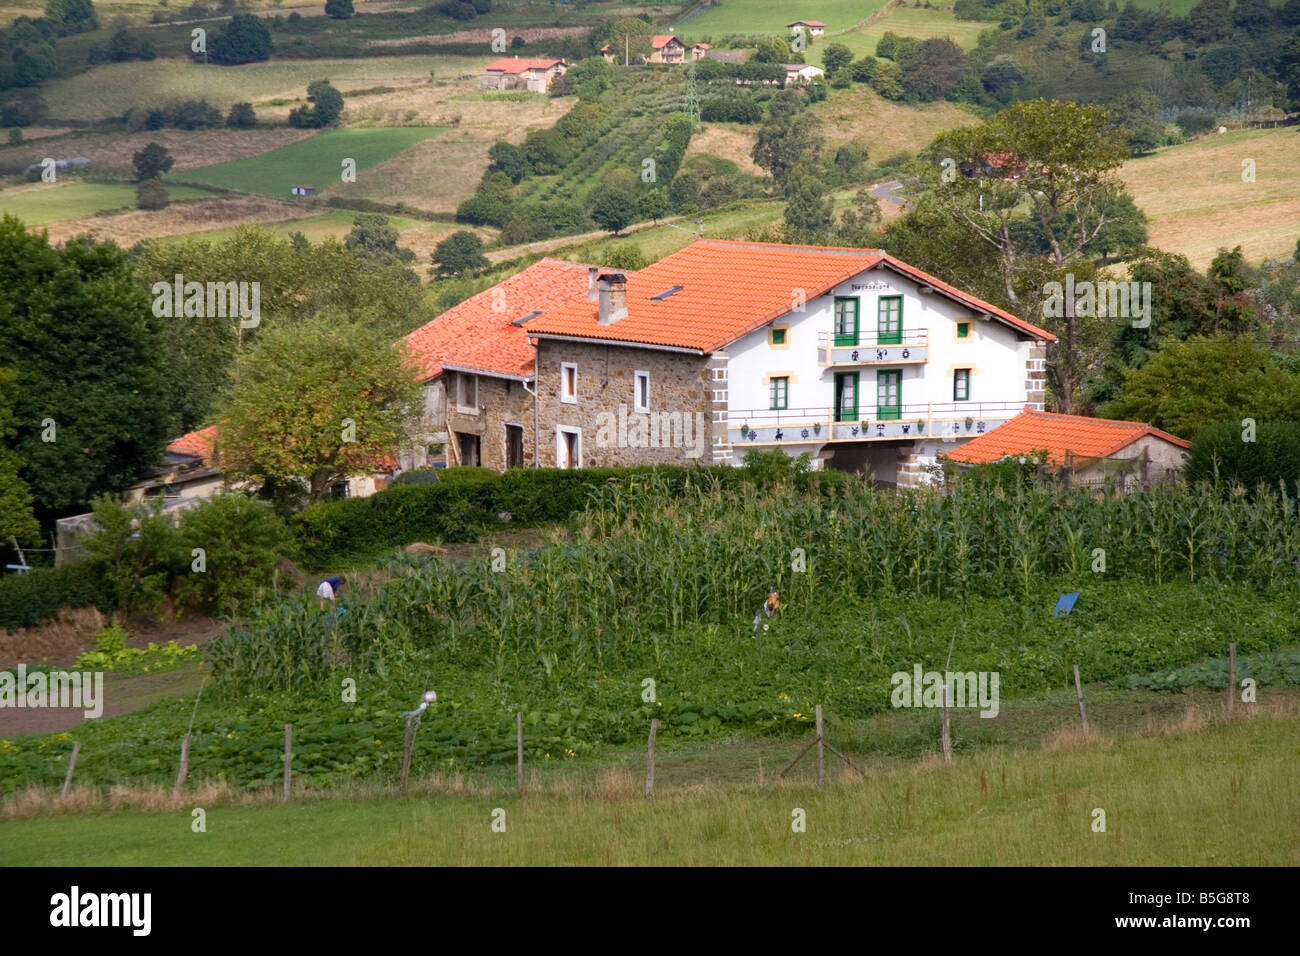 Rural farm near the town of Bermeo in the province of Biscay Basque Country Northern Spain Stock Photo